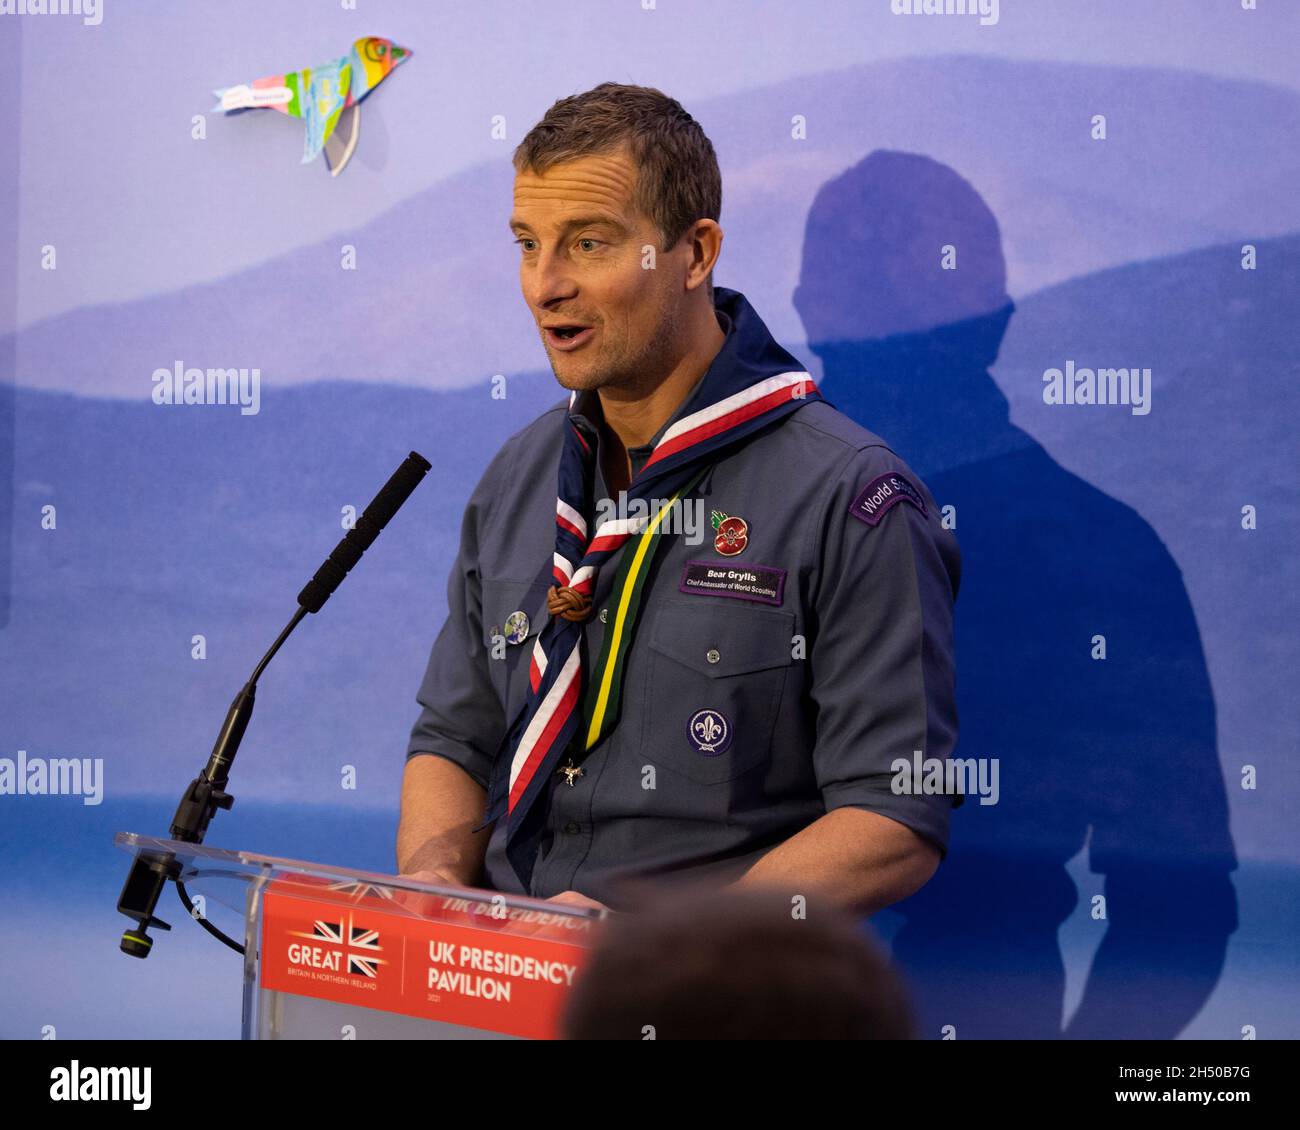 Glasgow, Scotland, UK. 5th Nov, 2021. PICTURED: Bear Grylls OBE, British adventurer and the UK's head Scout, seen at United Kingdom Pavillion at COP26 Climate Change Conference giving a speech. Edward Michael 'Bear' Grylls OBE is a British adventurer, writer, television presenter and businessman. Grylls first drew attention after embarking on a number of adventures, and then became widely known for his television series Man vs. Wild. Credit: Colin Fisher/Alamy Live News Stock Photo